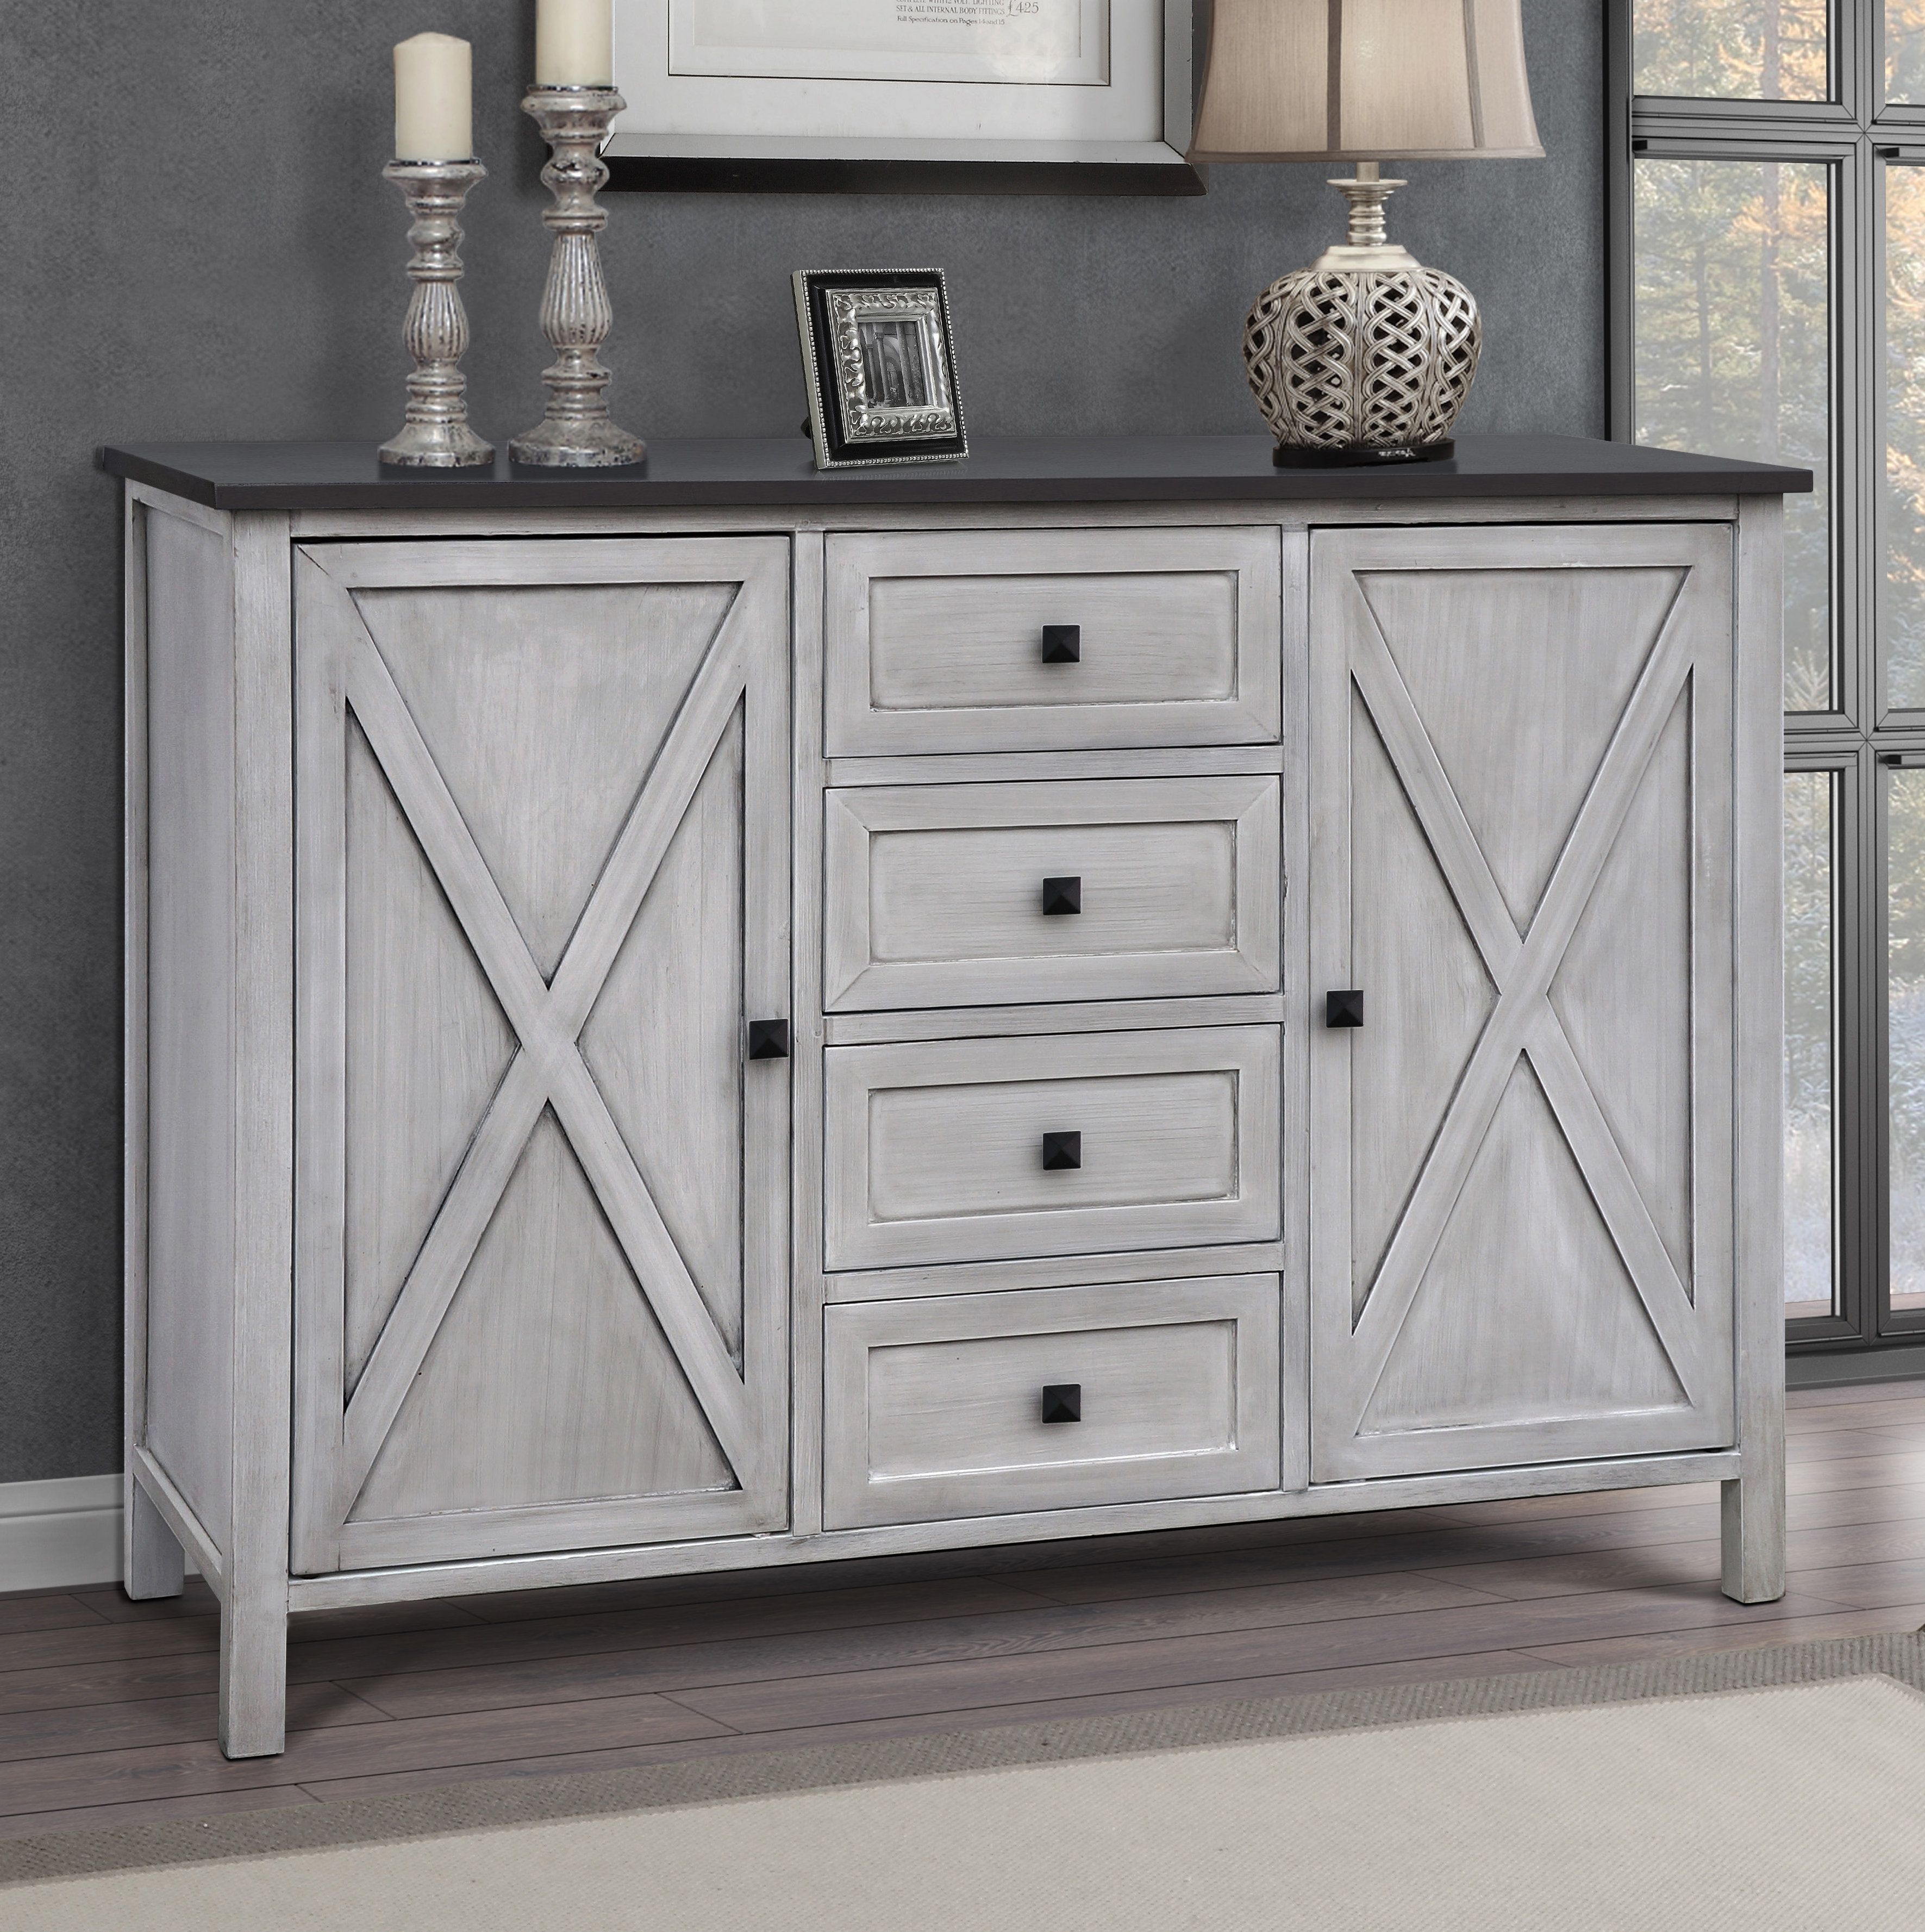 Lamb Farmhouse 4 Drawer 2 Door Accent Cabinet | Birch Lane With 2018 4 Door/4 Drawer Metal Inserts Sideboards (View 17 of 20)